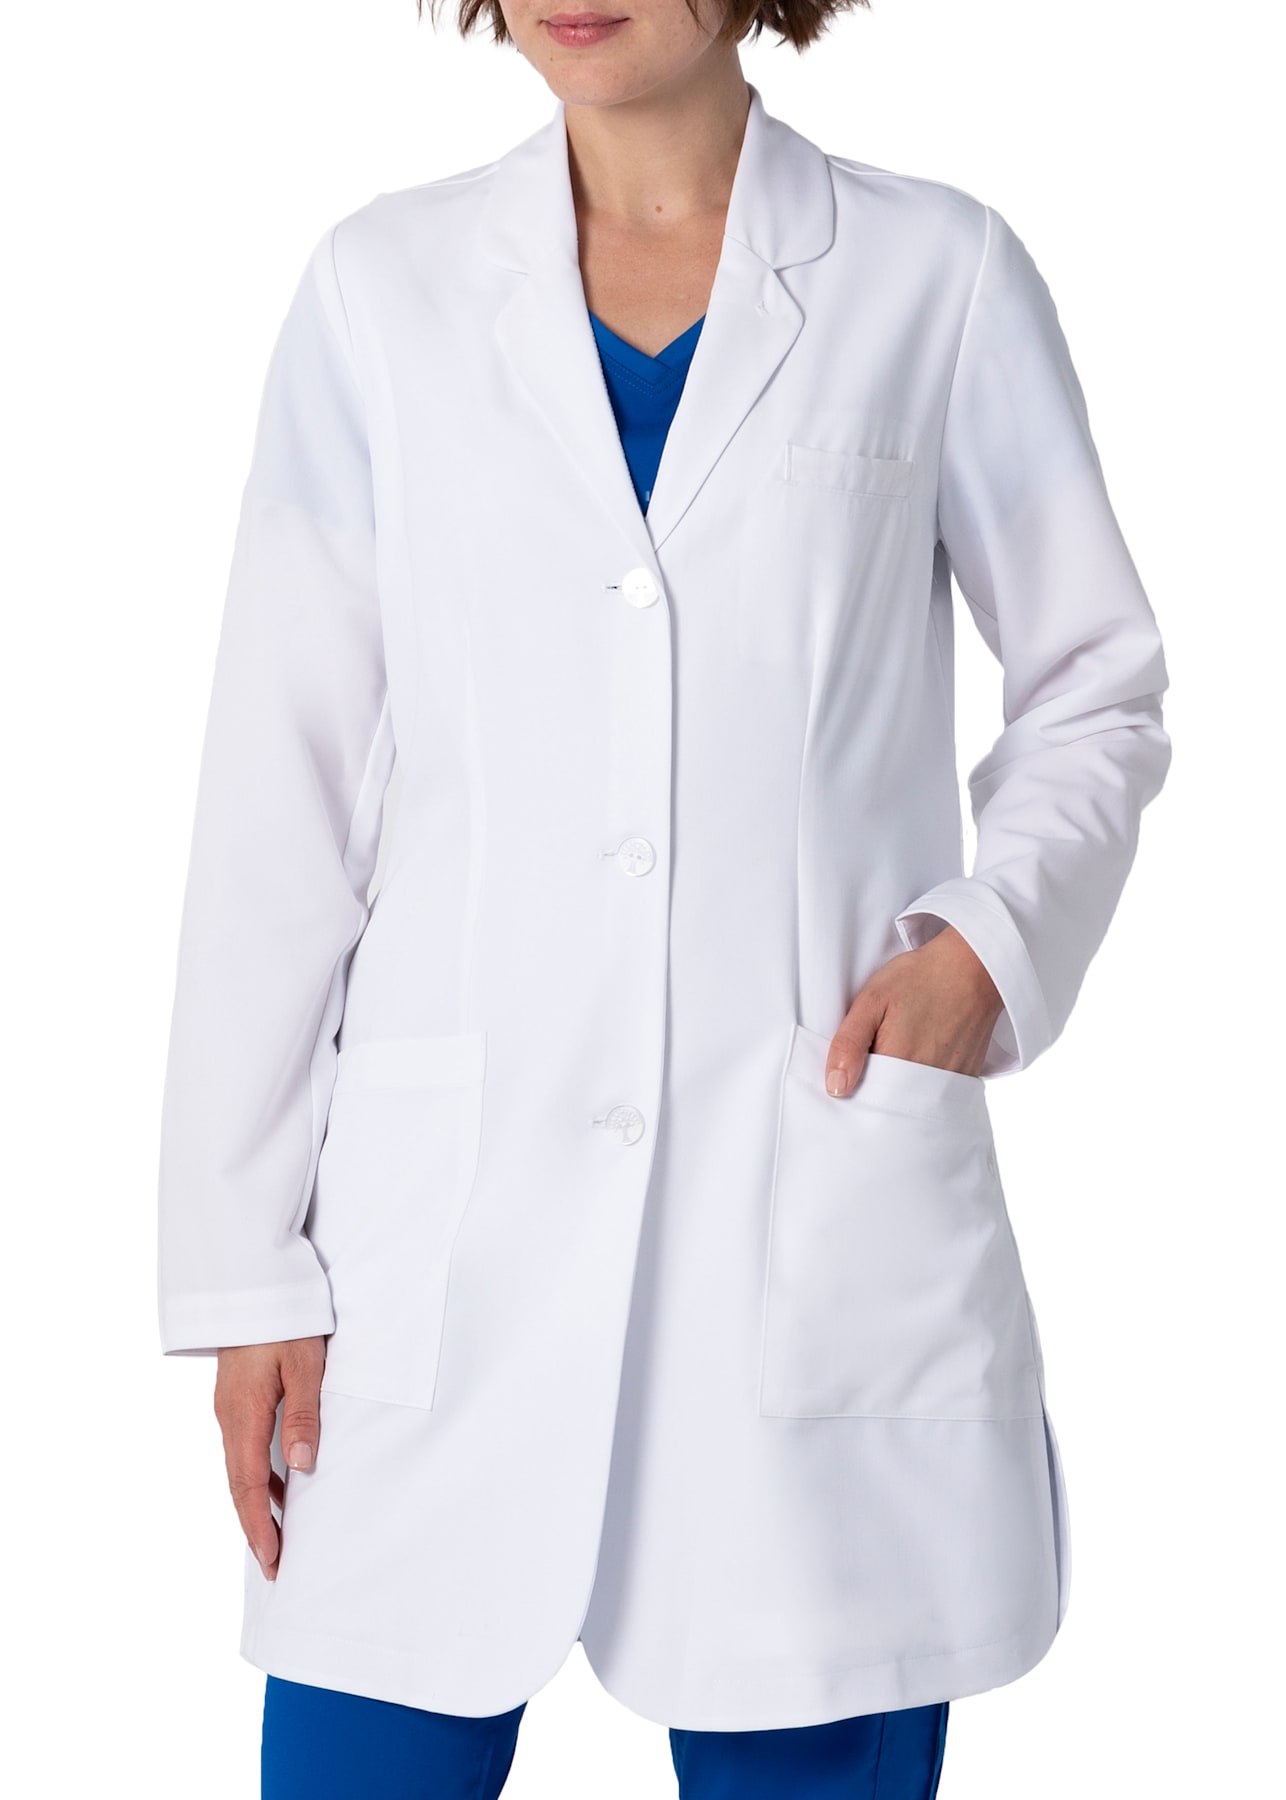 The White Coat The Modernist Fiona 35 Inch 3 Pocket Lab Coat